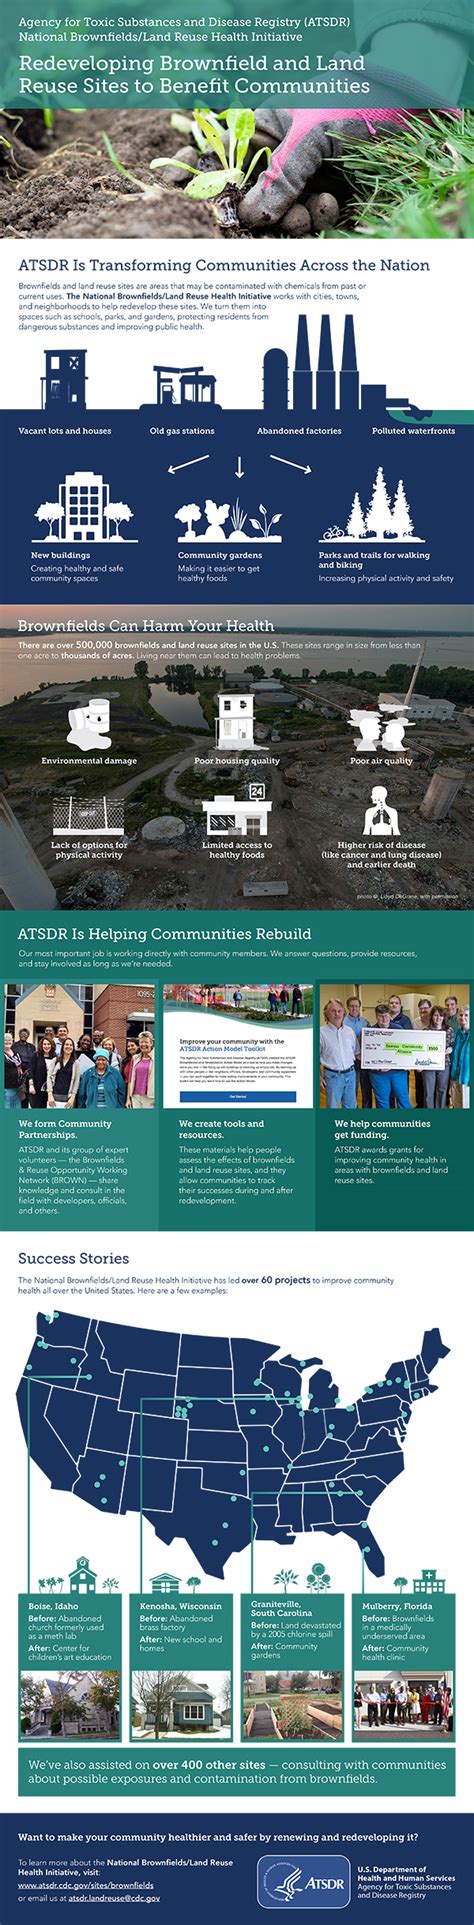 Infographic Redeveloping Brownfield And Land Reuse Sites To Benefit